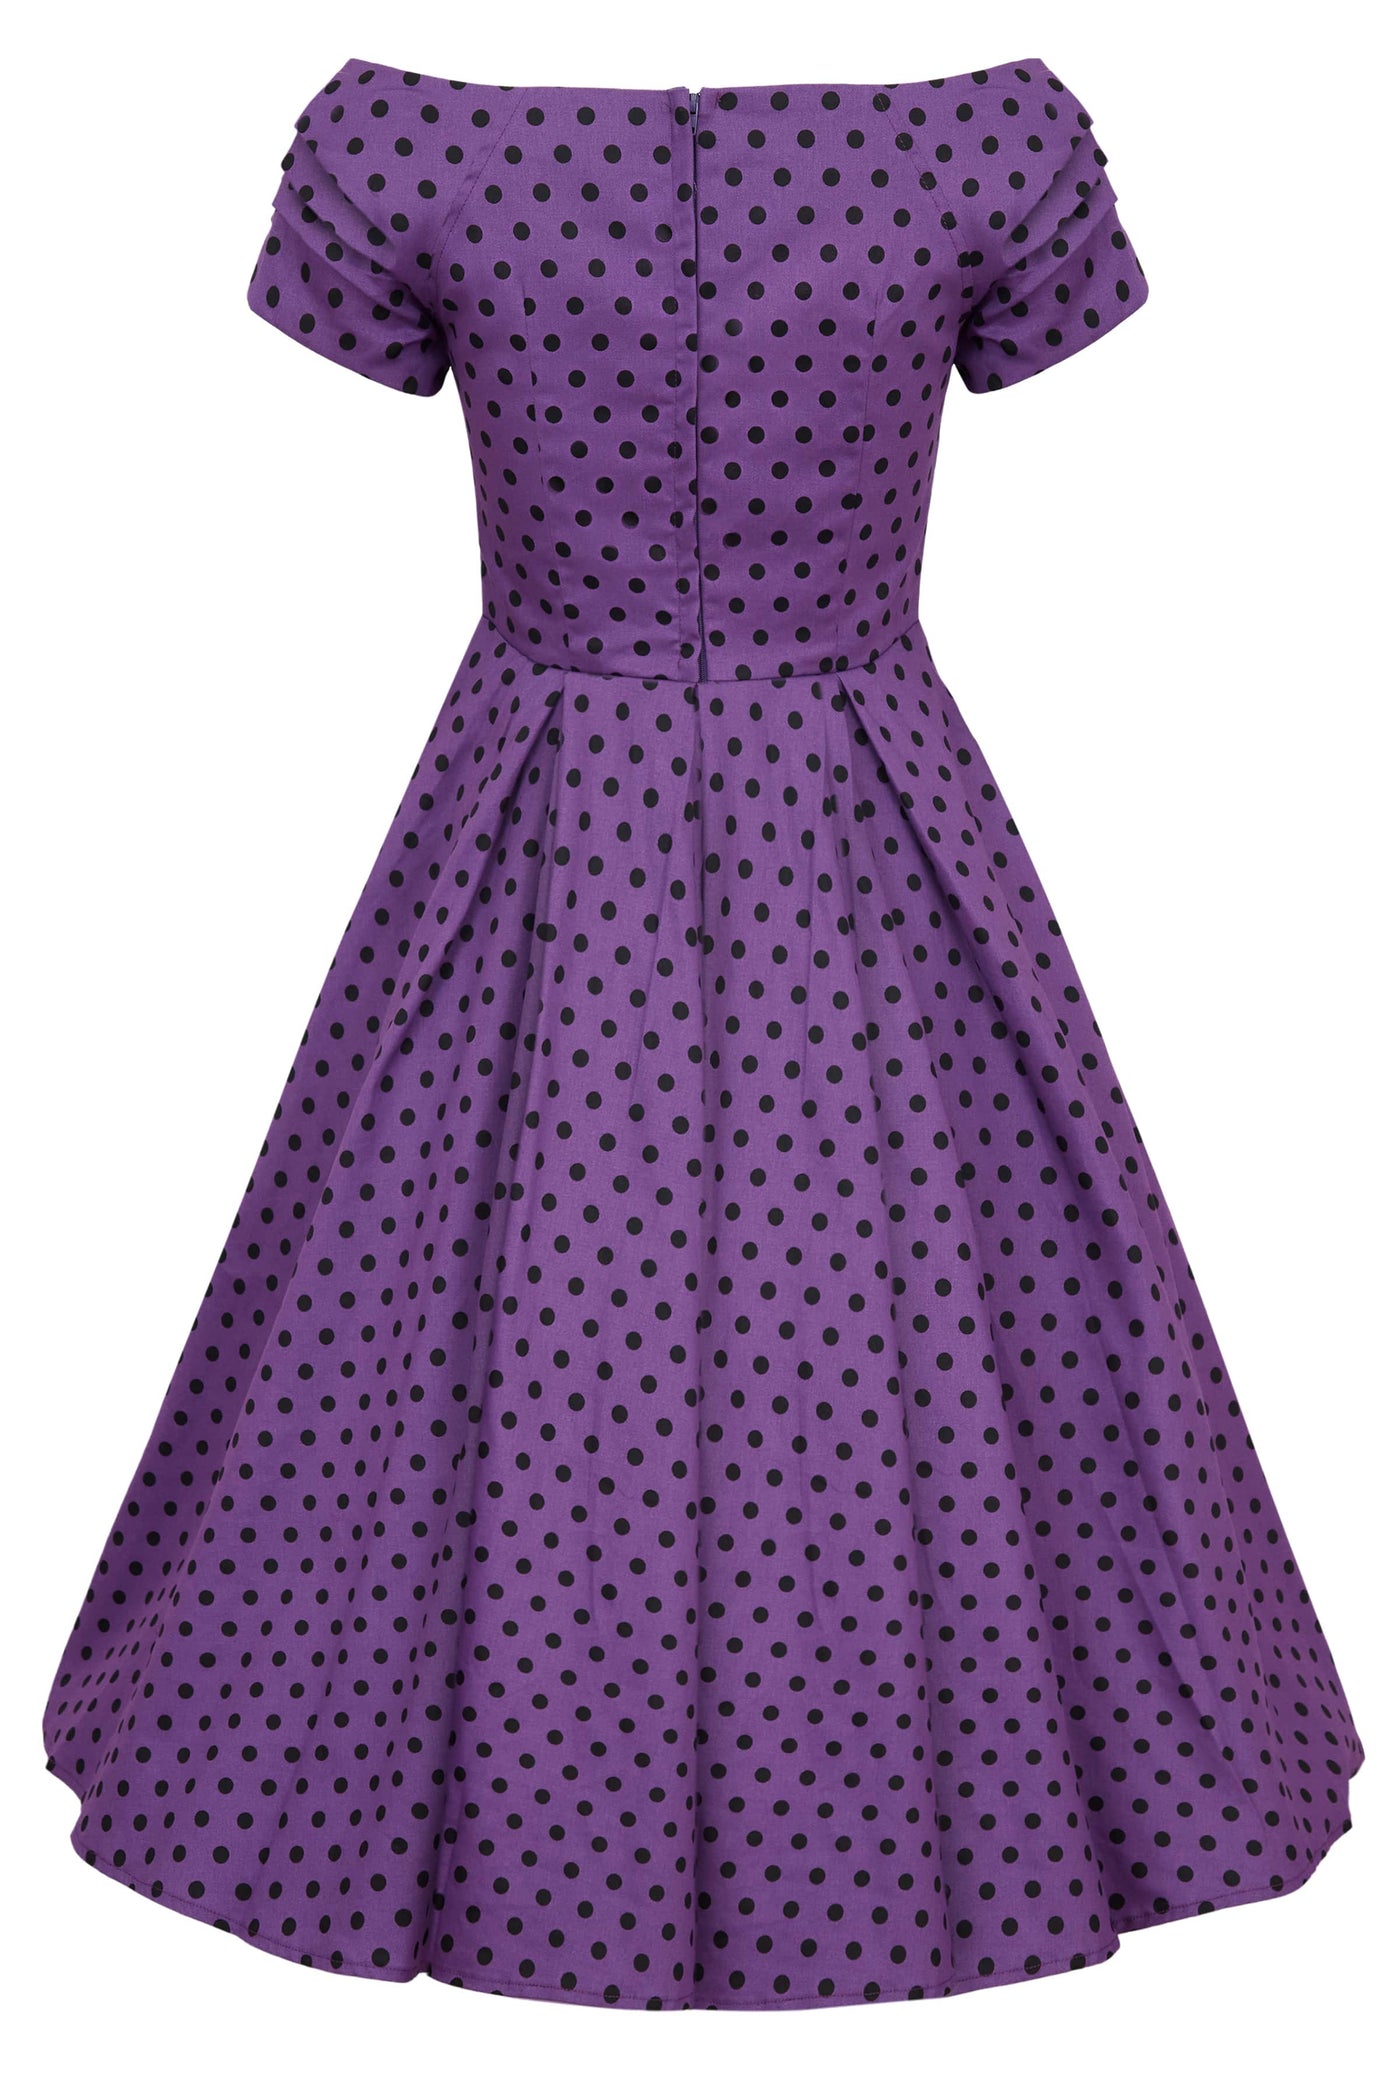 Rockabilly Purple Swing Dress with Sleeves back view